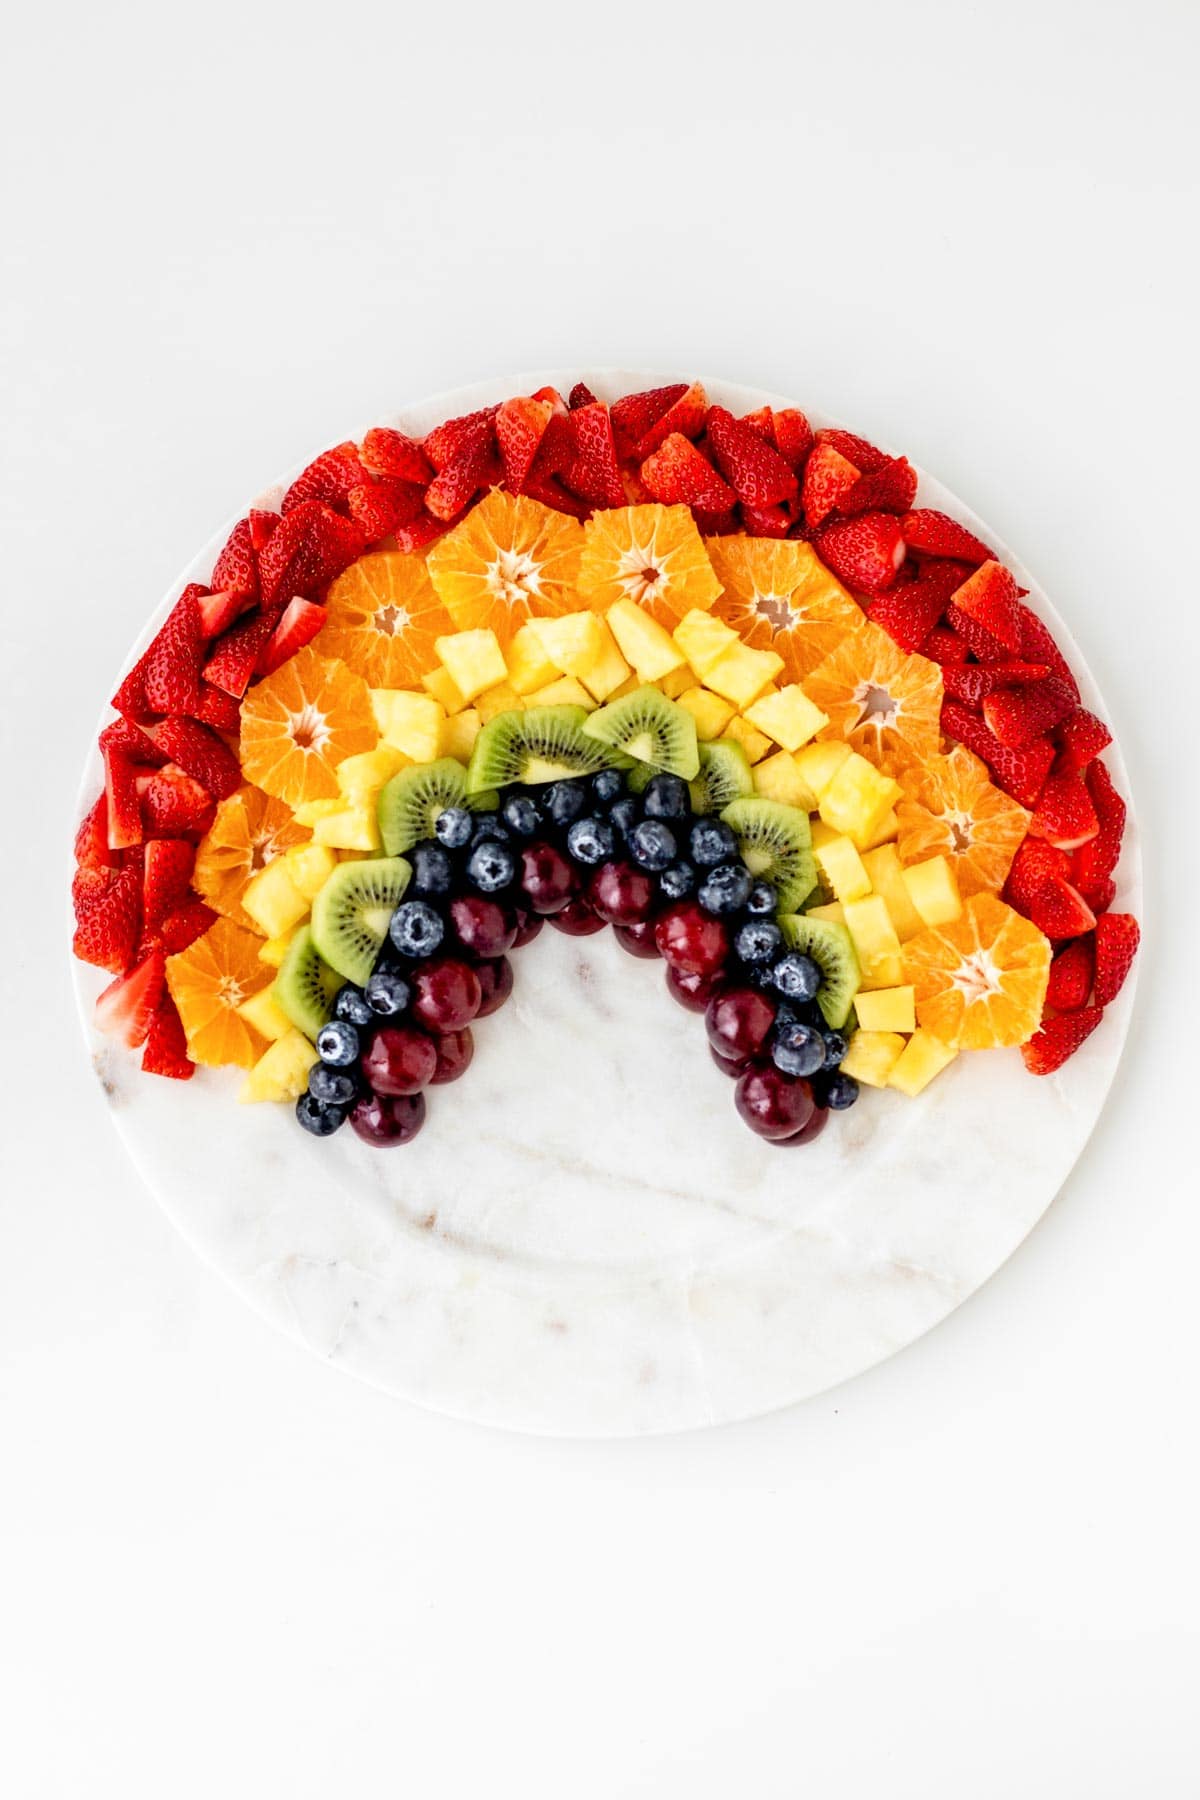 All of the fruit for the rainbow fruit tray arranged to look like a color rainbow.